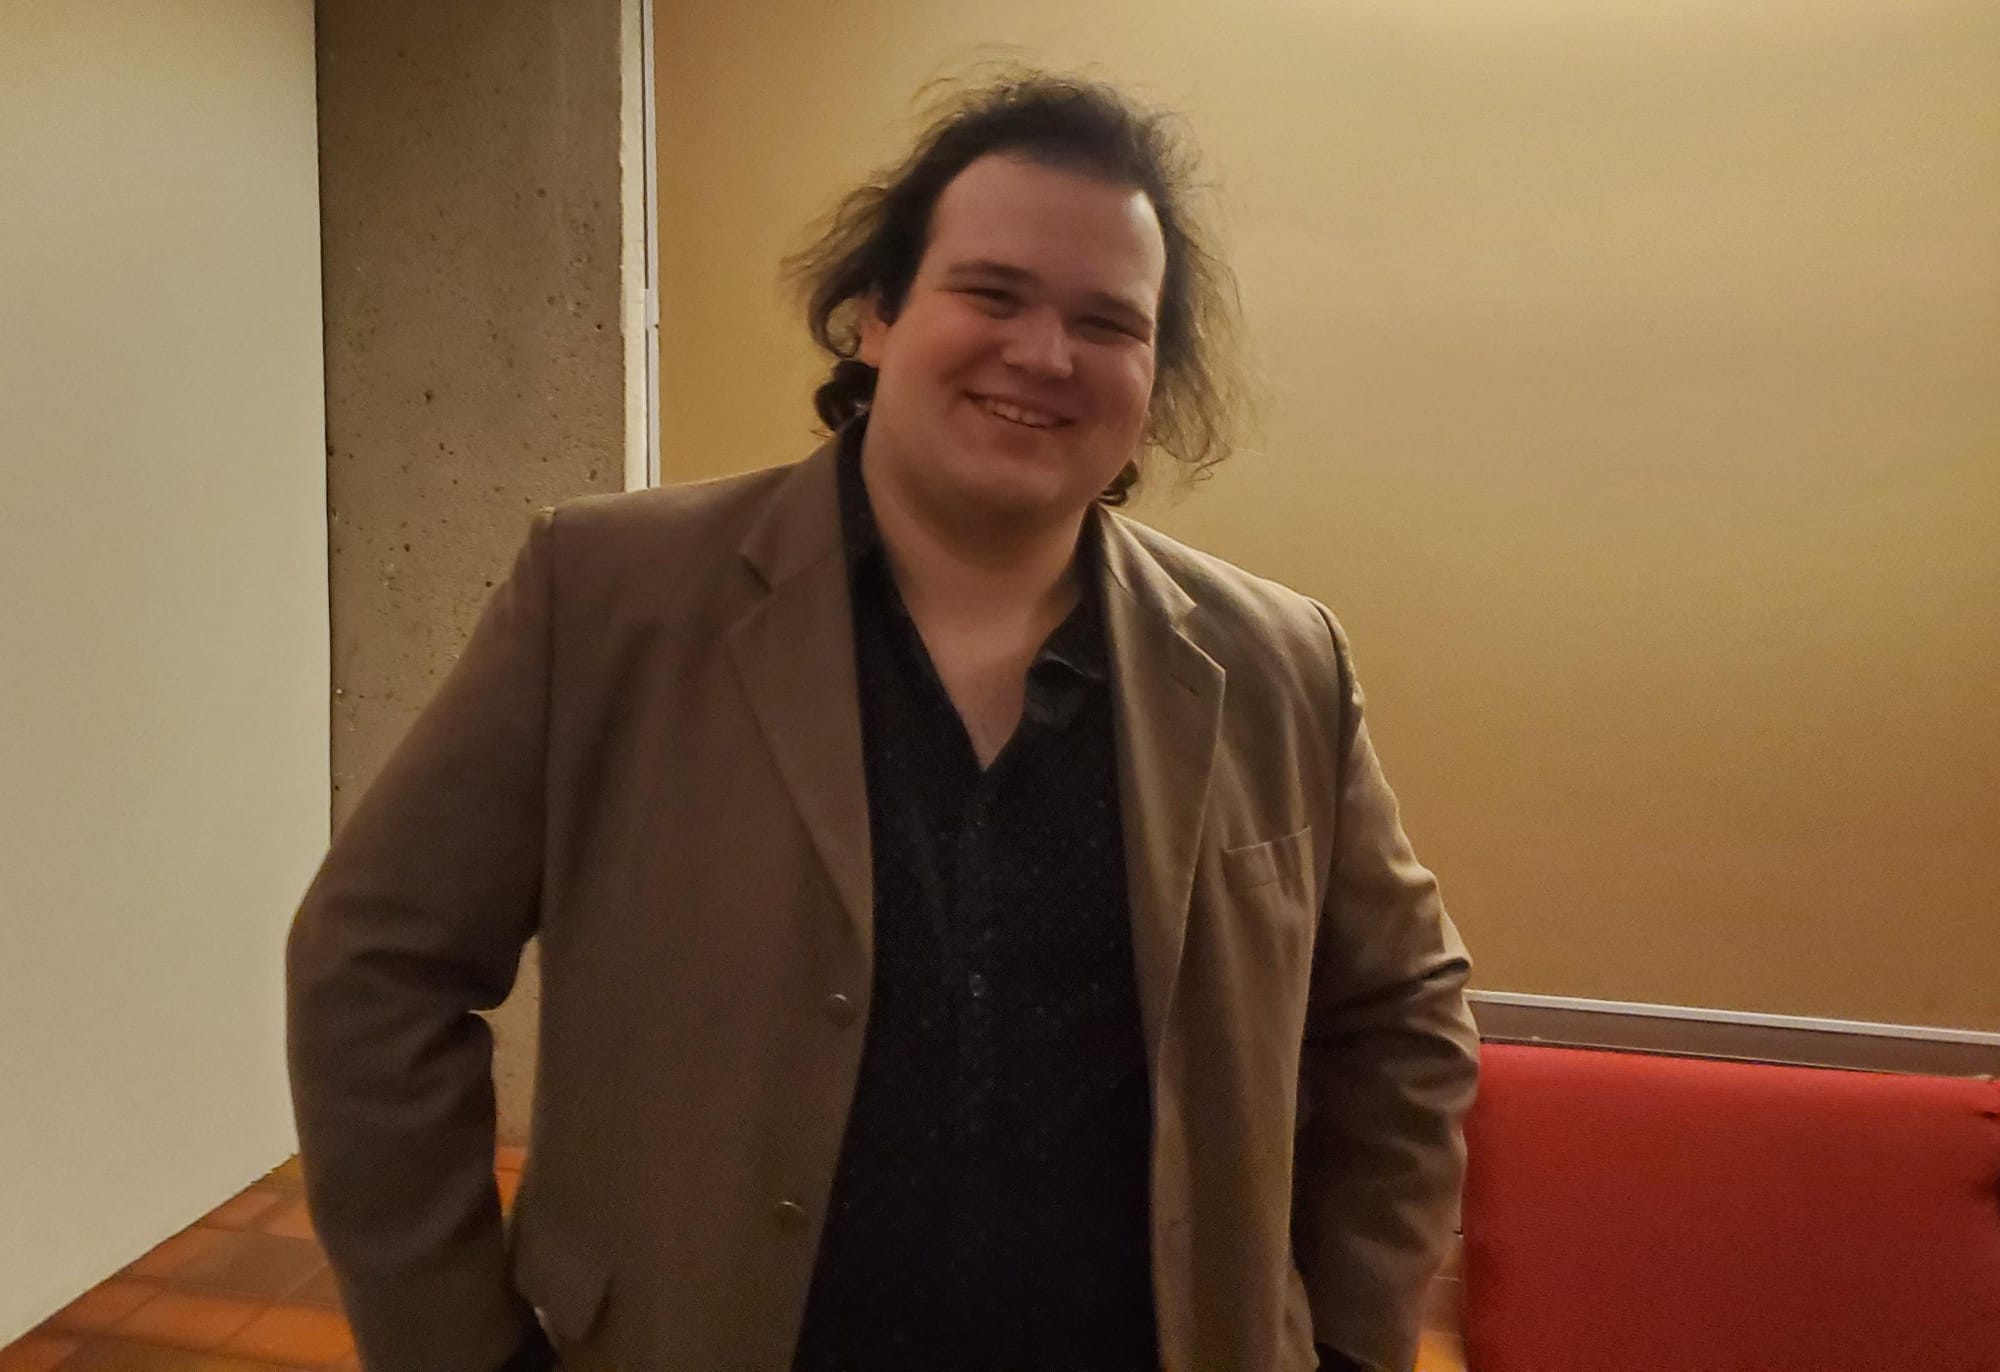 A person with shoulder-length dark hair, wearing a tan blazer and dark button-up shirt.